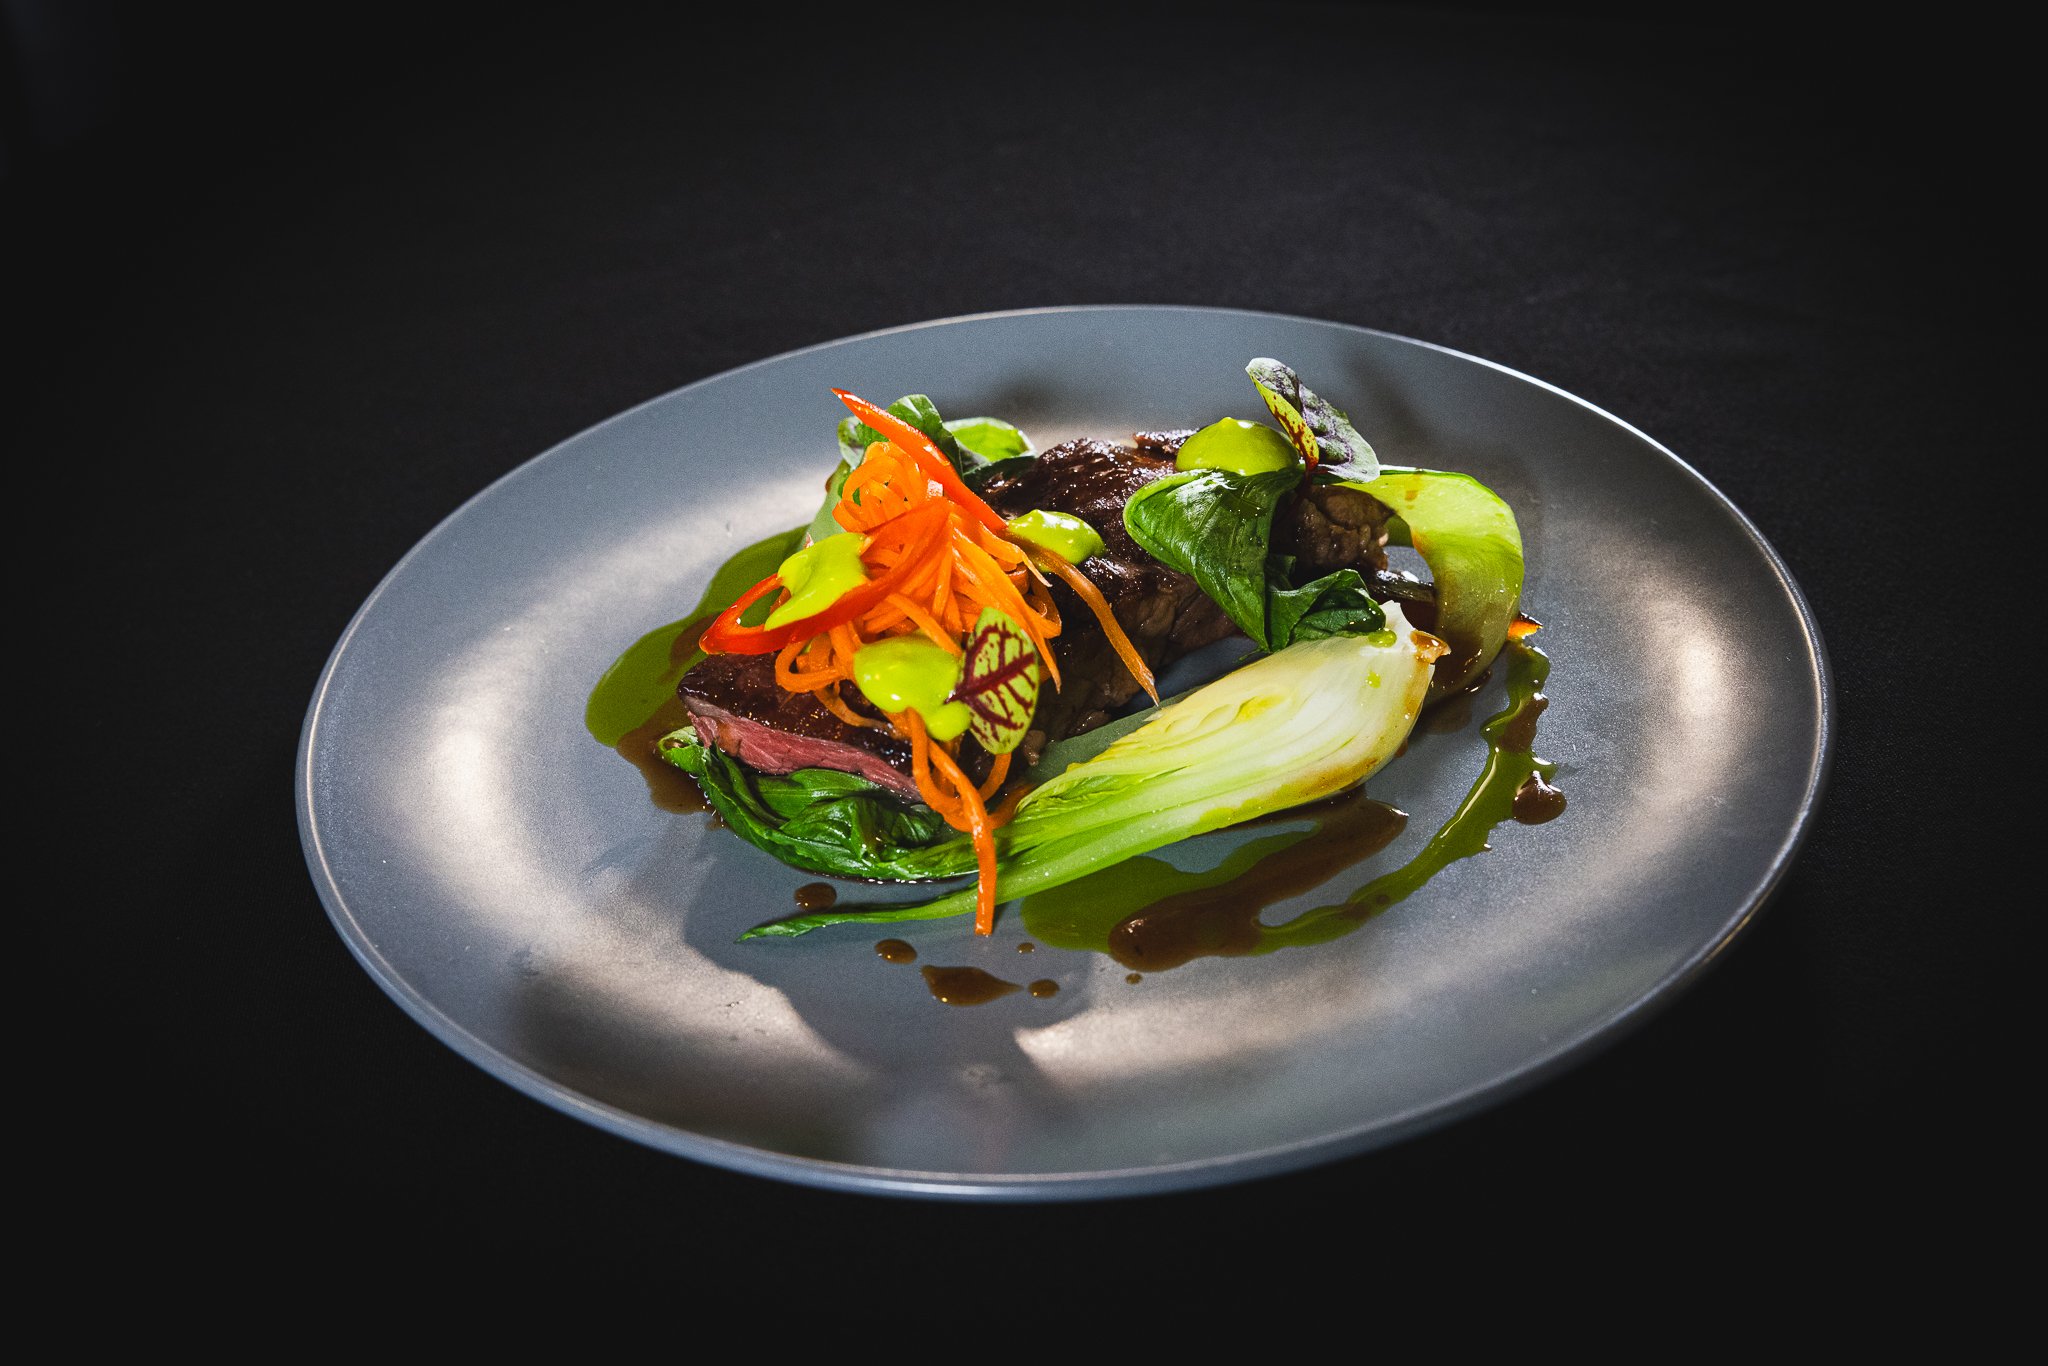 Imperial Chinese Rump of Beef with Pickled Carrots & Pak Choi